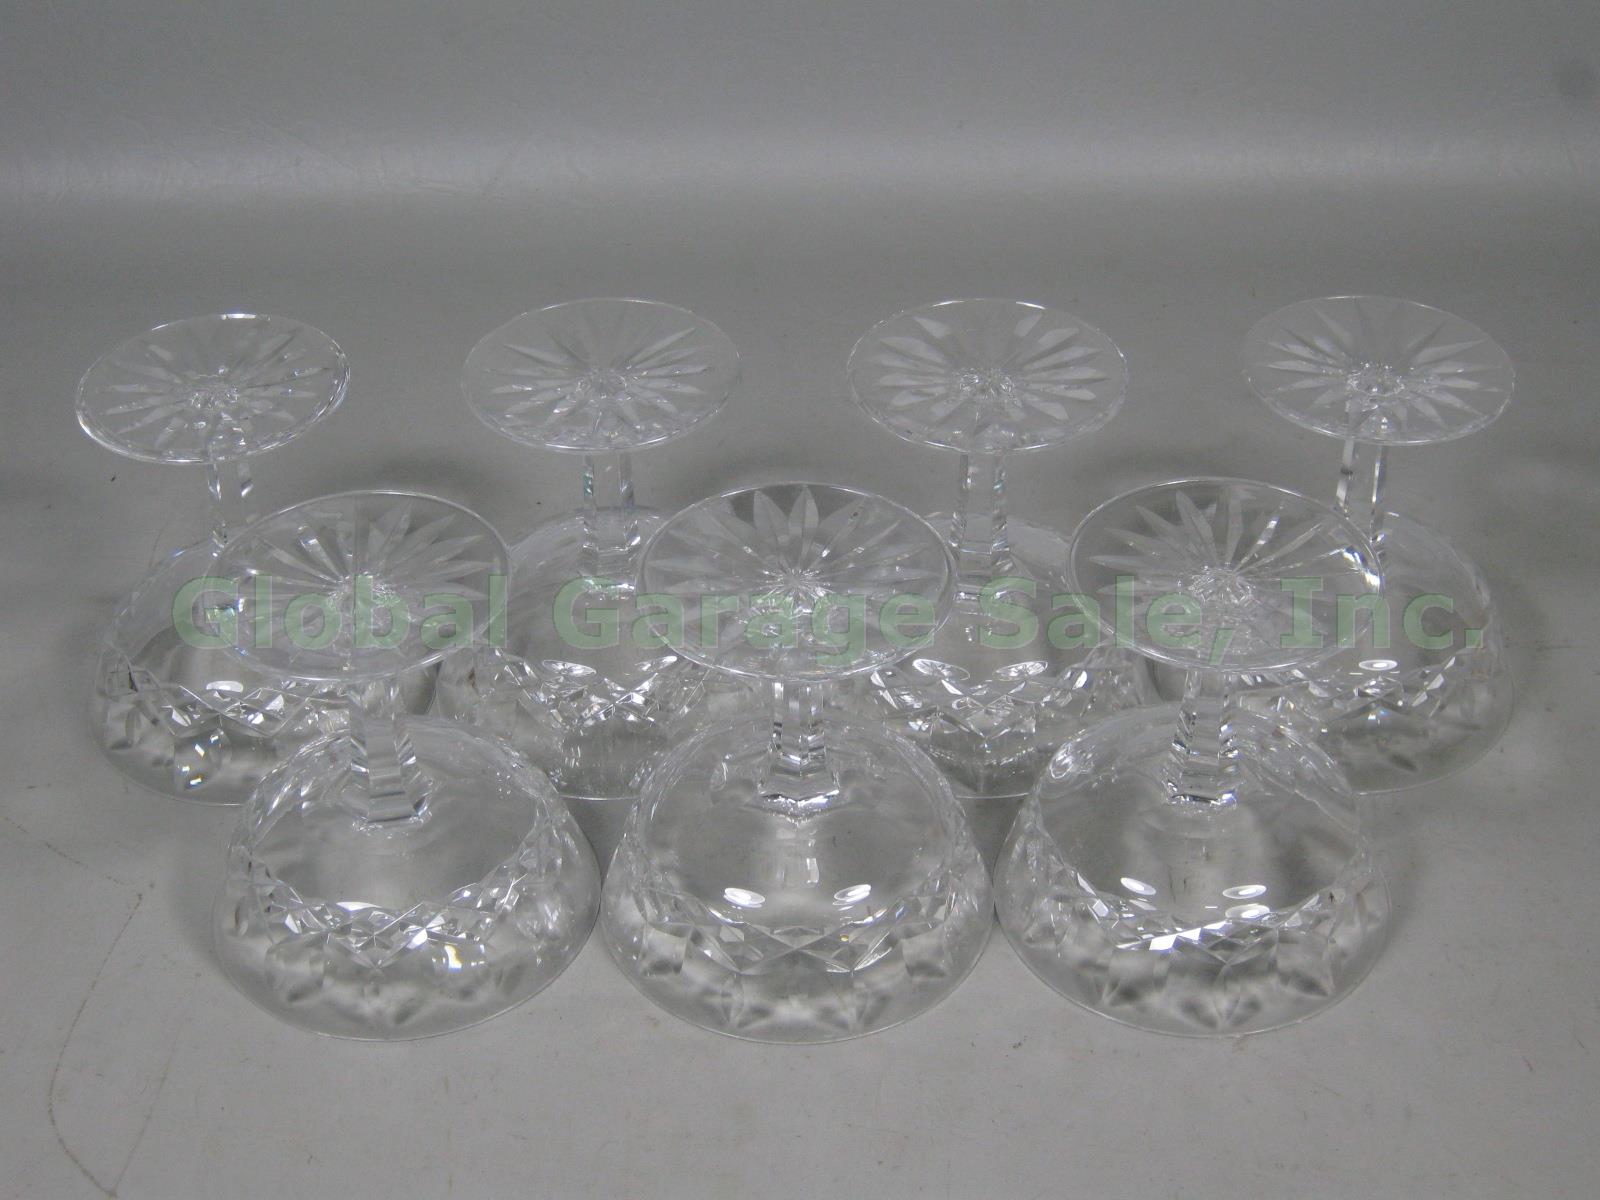 7 Waterford Crystal Lismore Sherbet Champagne Glass 4-1/8" One Owner Bought New 2